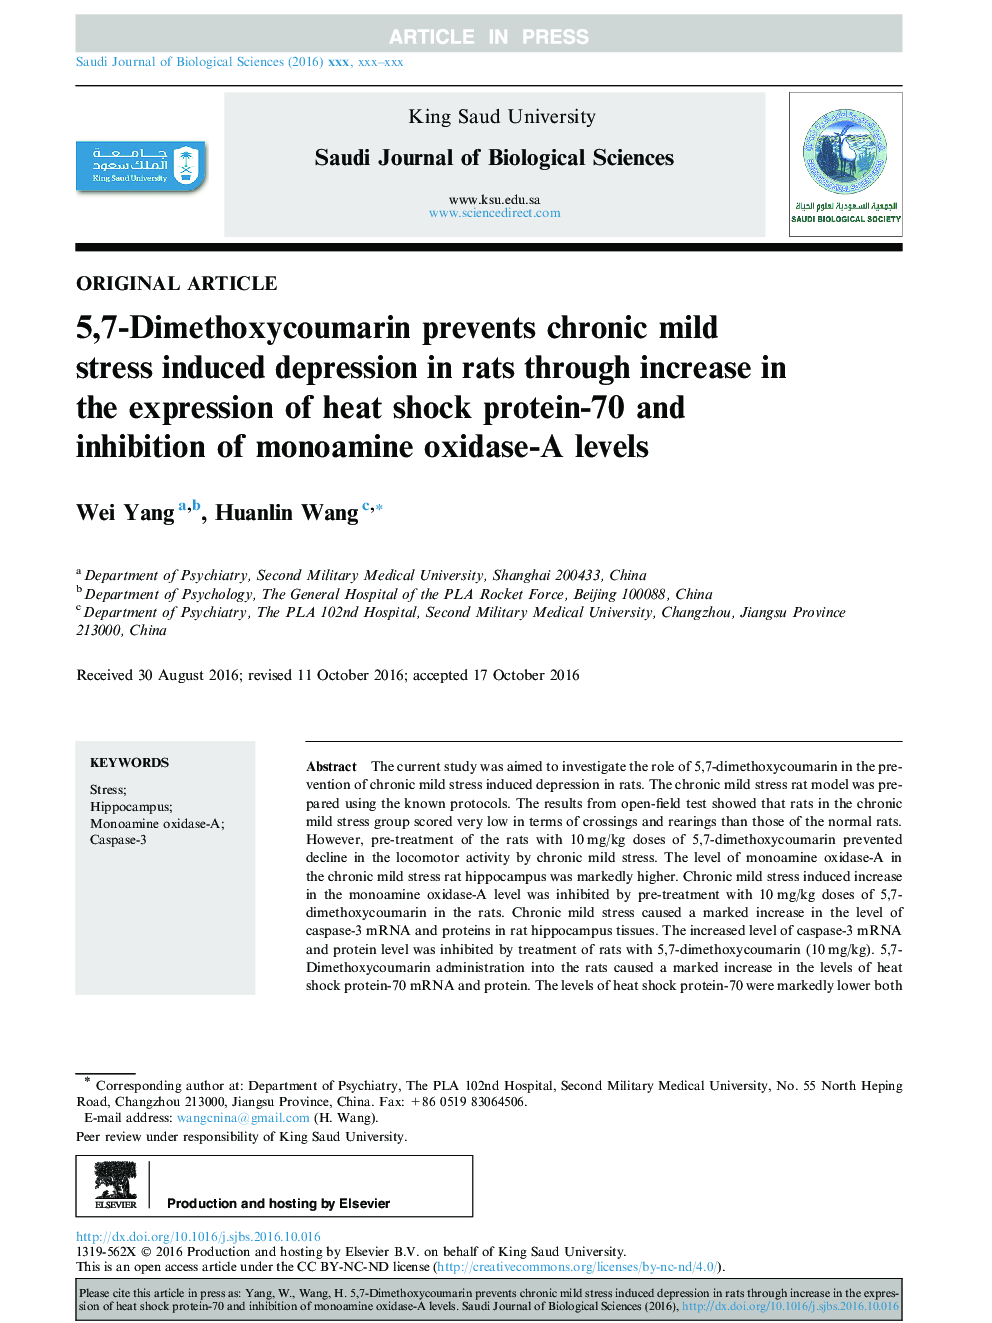 5,7-Dimethoxycoumarin prevents chronic mild stress induced depression in rats through increase in the expression of heat shock protein-70 and inhibition of monoamine oxidase-A levels